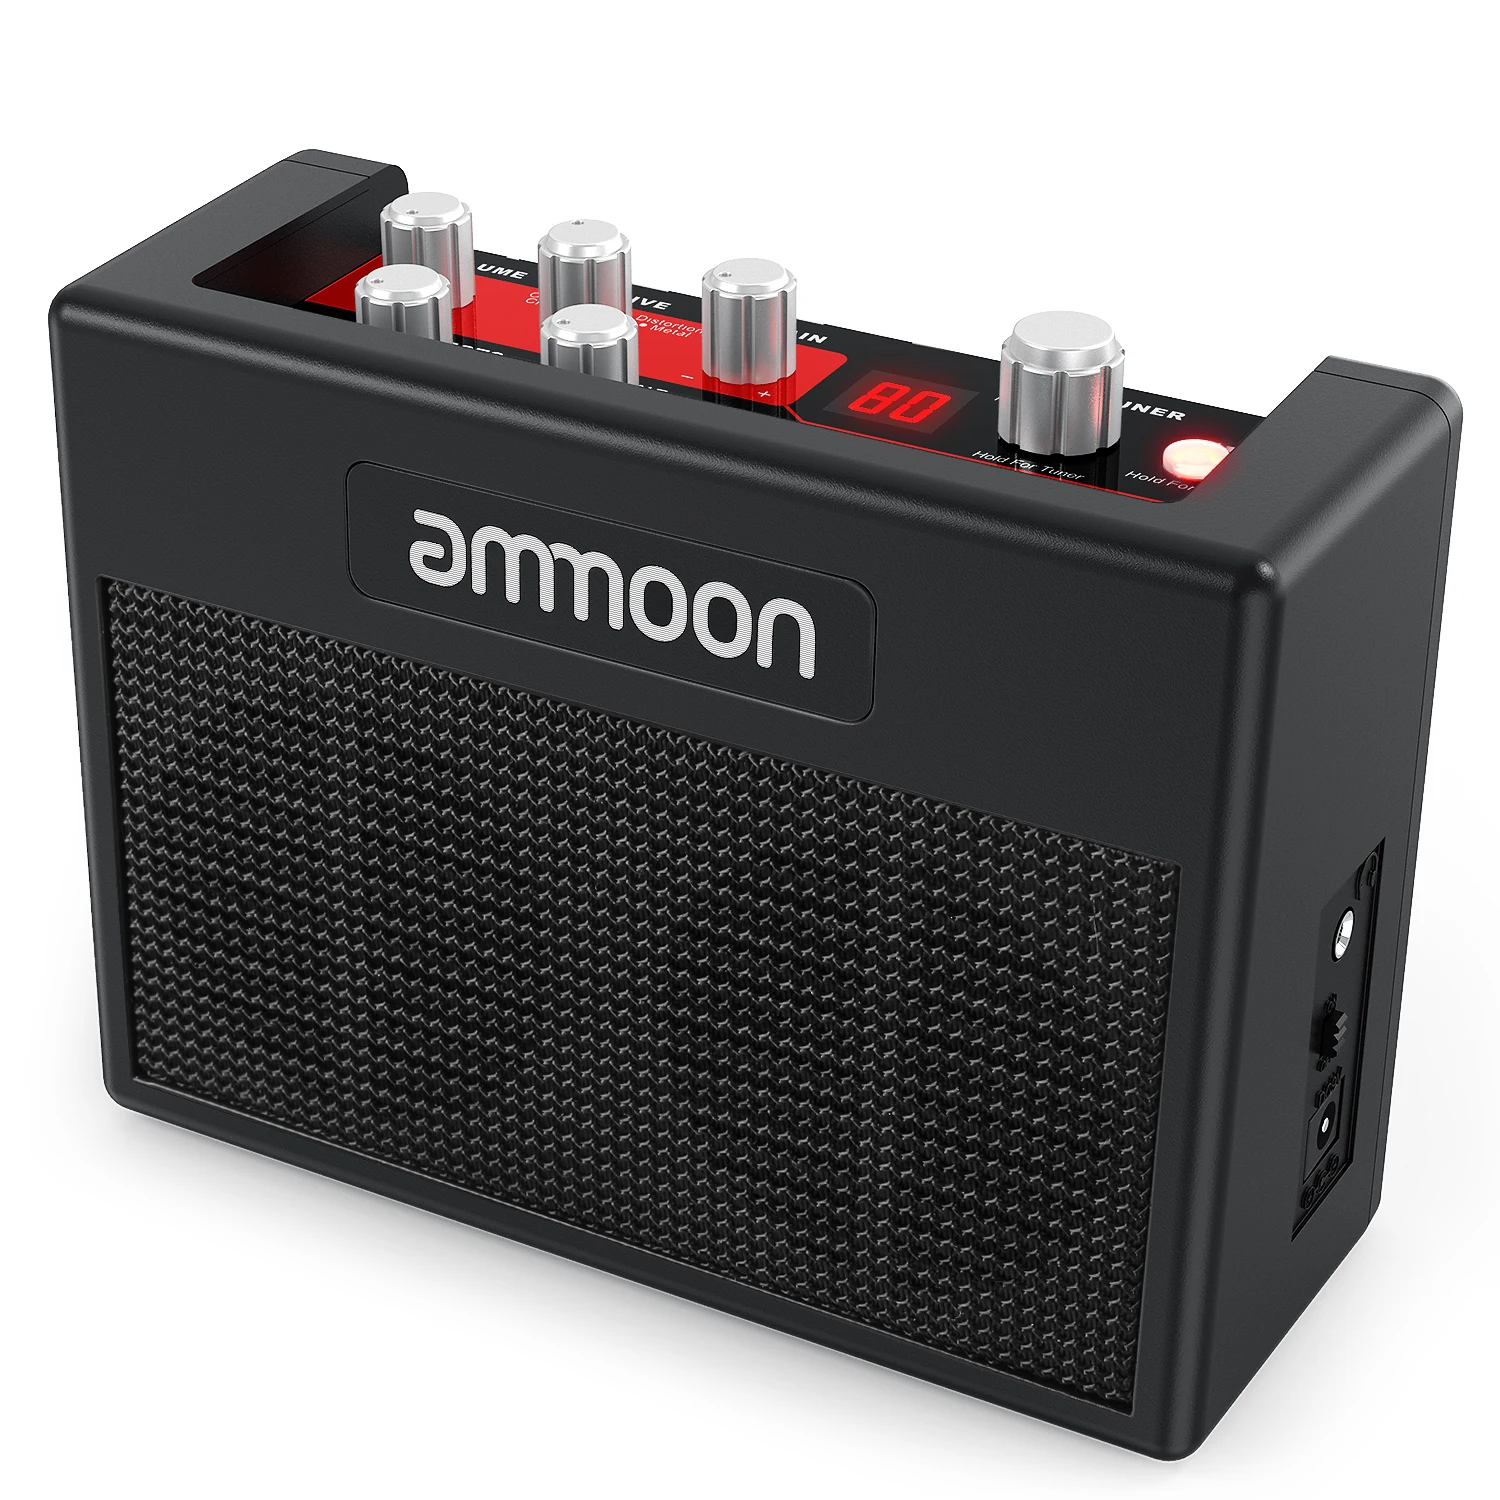 POCKAMP Portable Guitar Amplifier Amp Built-in Multi-effects 80 Drum Rhythms Support Tuner Tap Tempo Functions